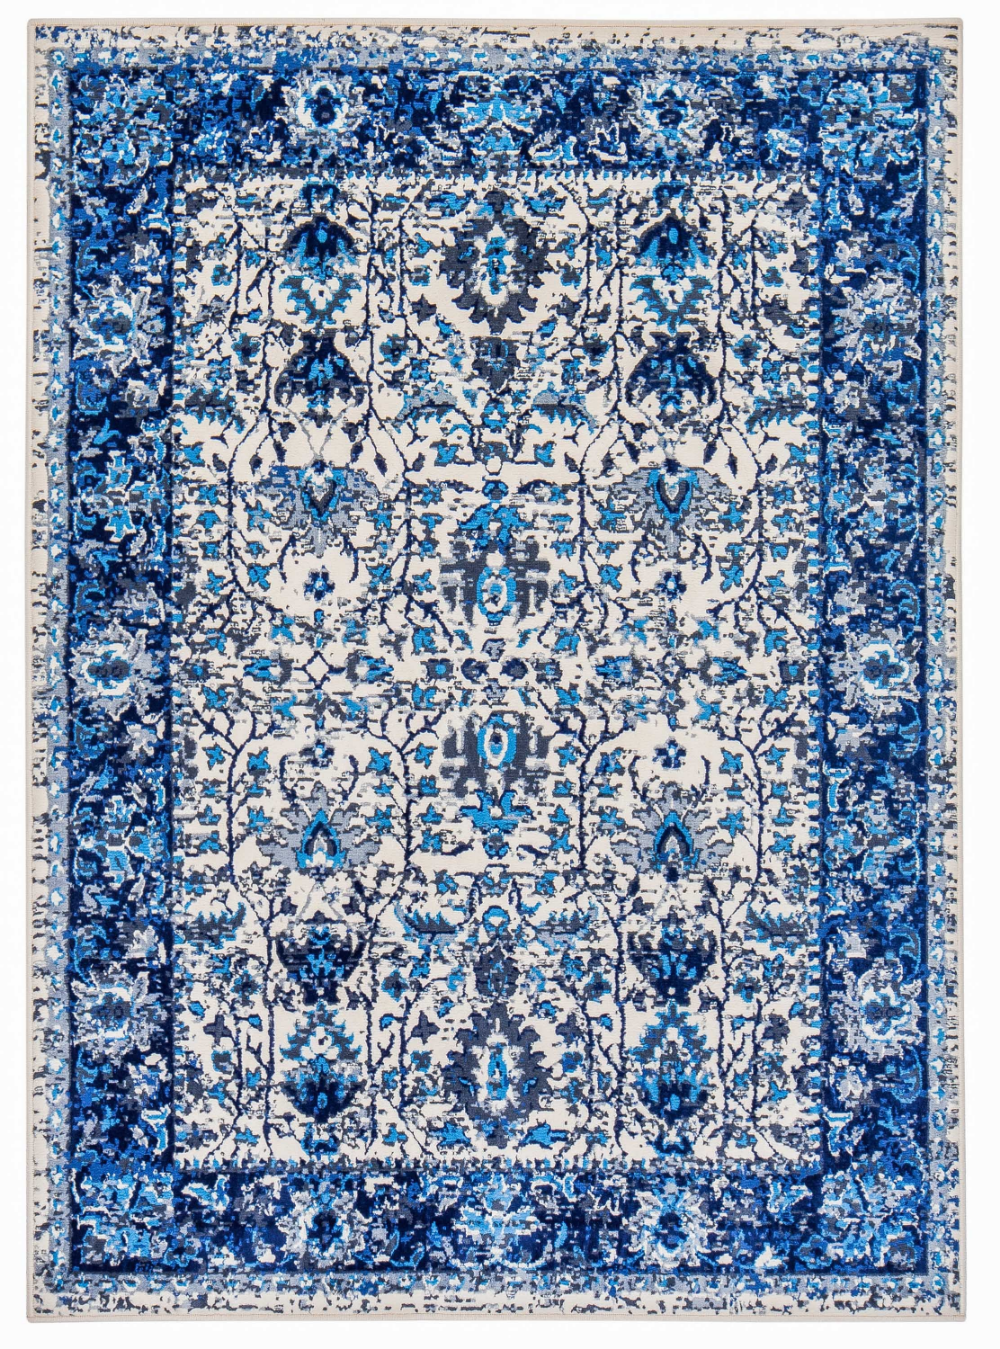 Give An Exotic Look To Your Room With
Blue Rugs